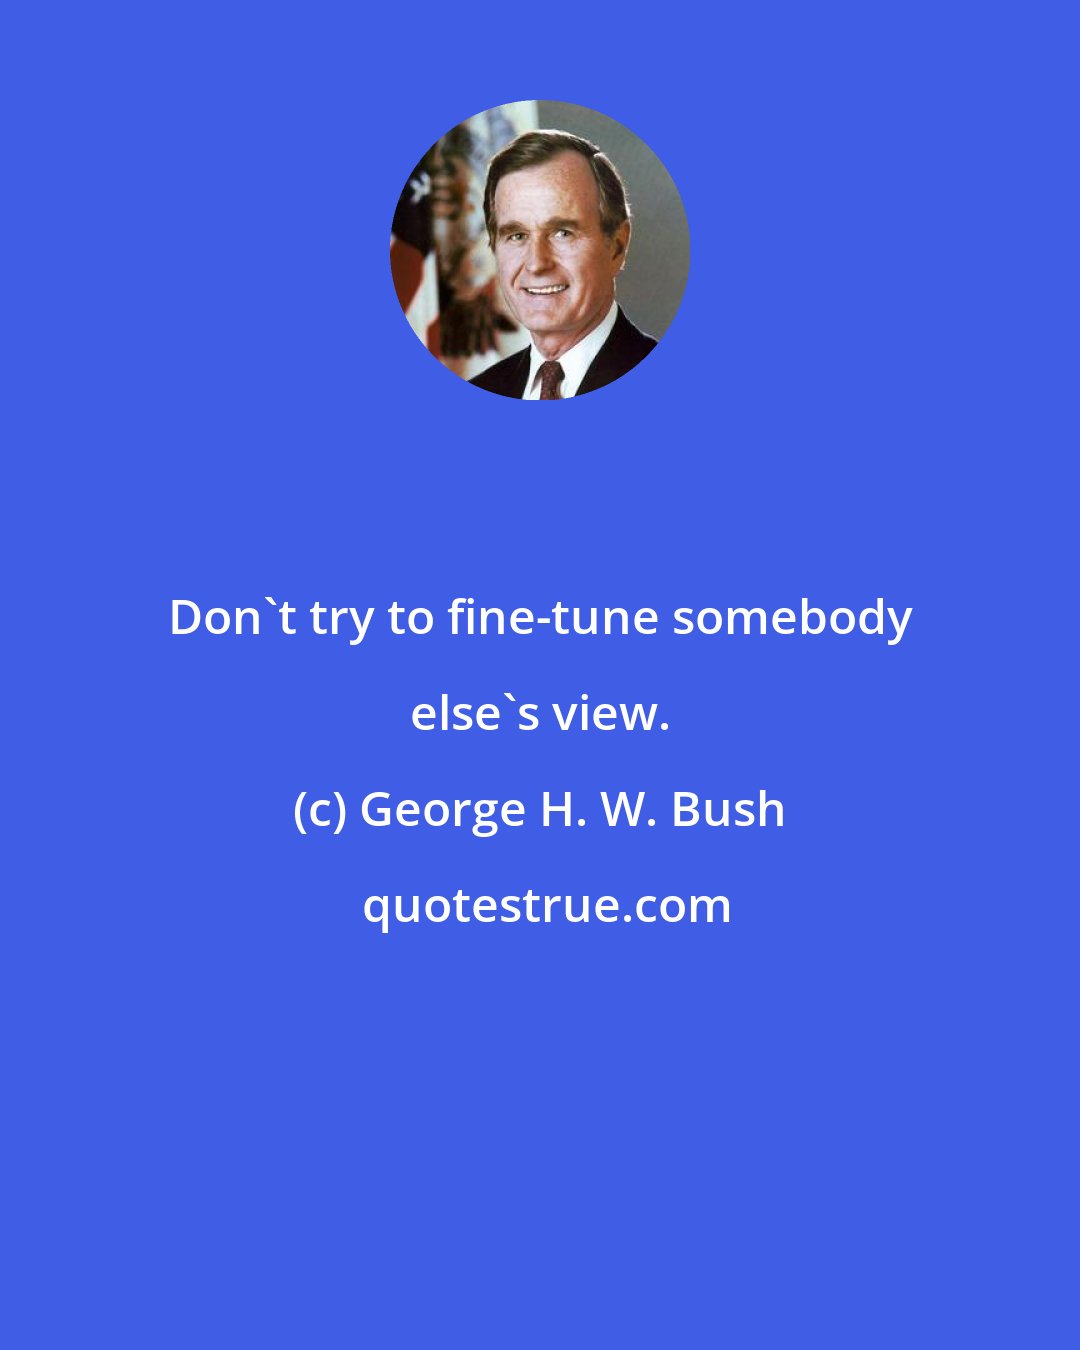 George H. W. Bush: Don't try to fine-tune somebody else's view.